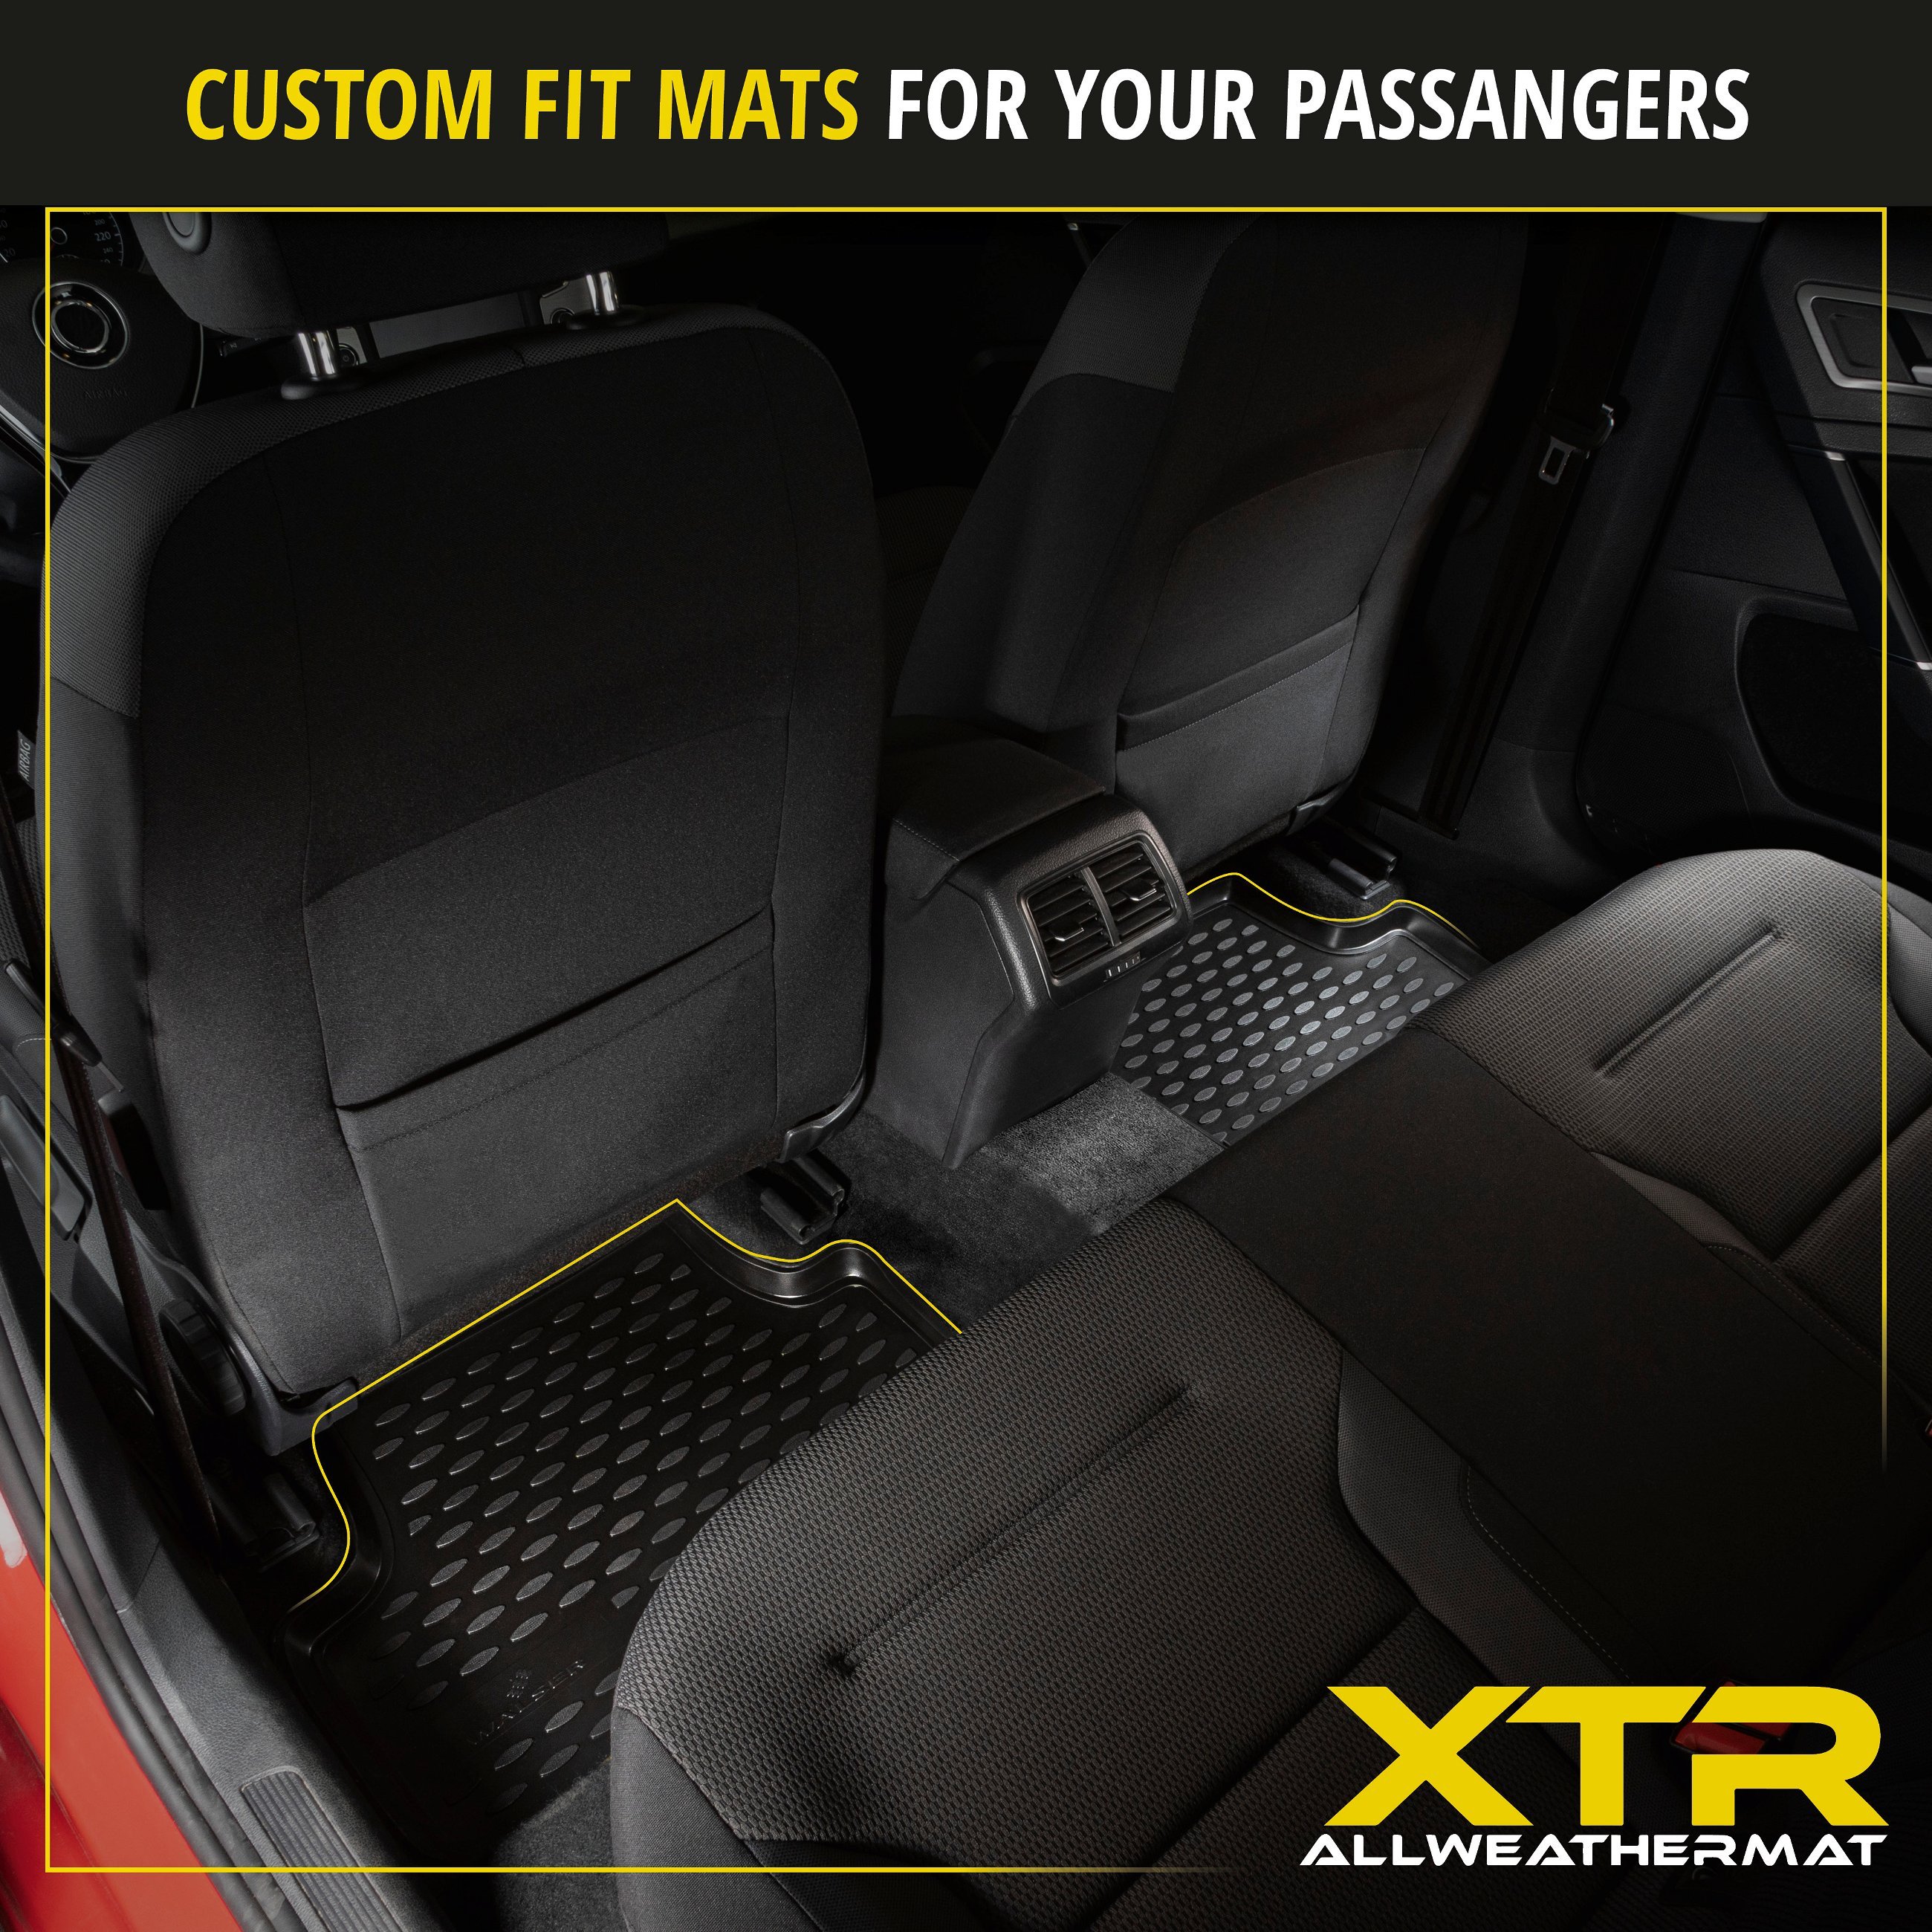 XTR Rubber Mats for Audi A6 Sedan 11/2010 - 09/2018, without compartment under drivers seat